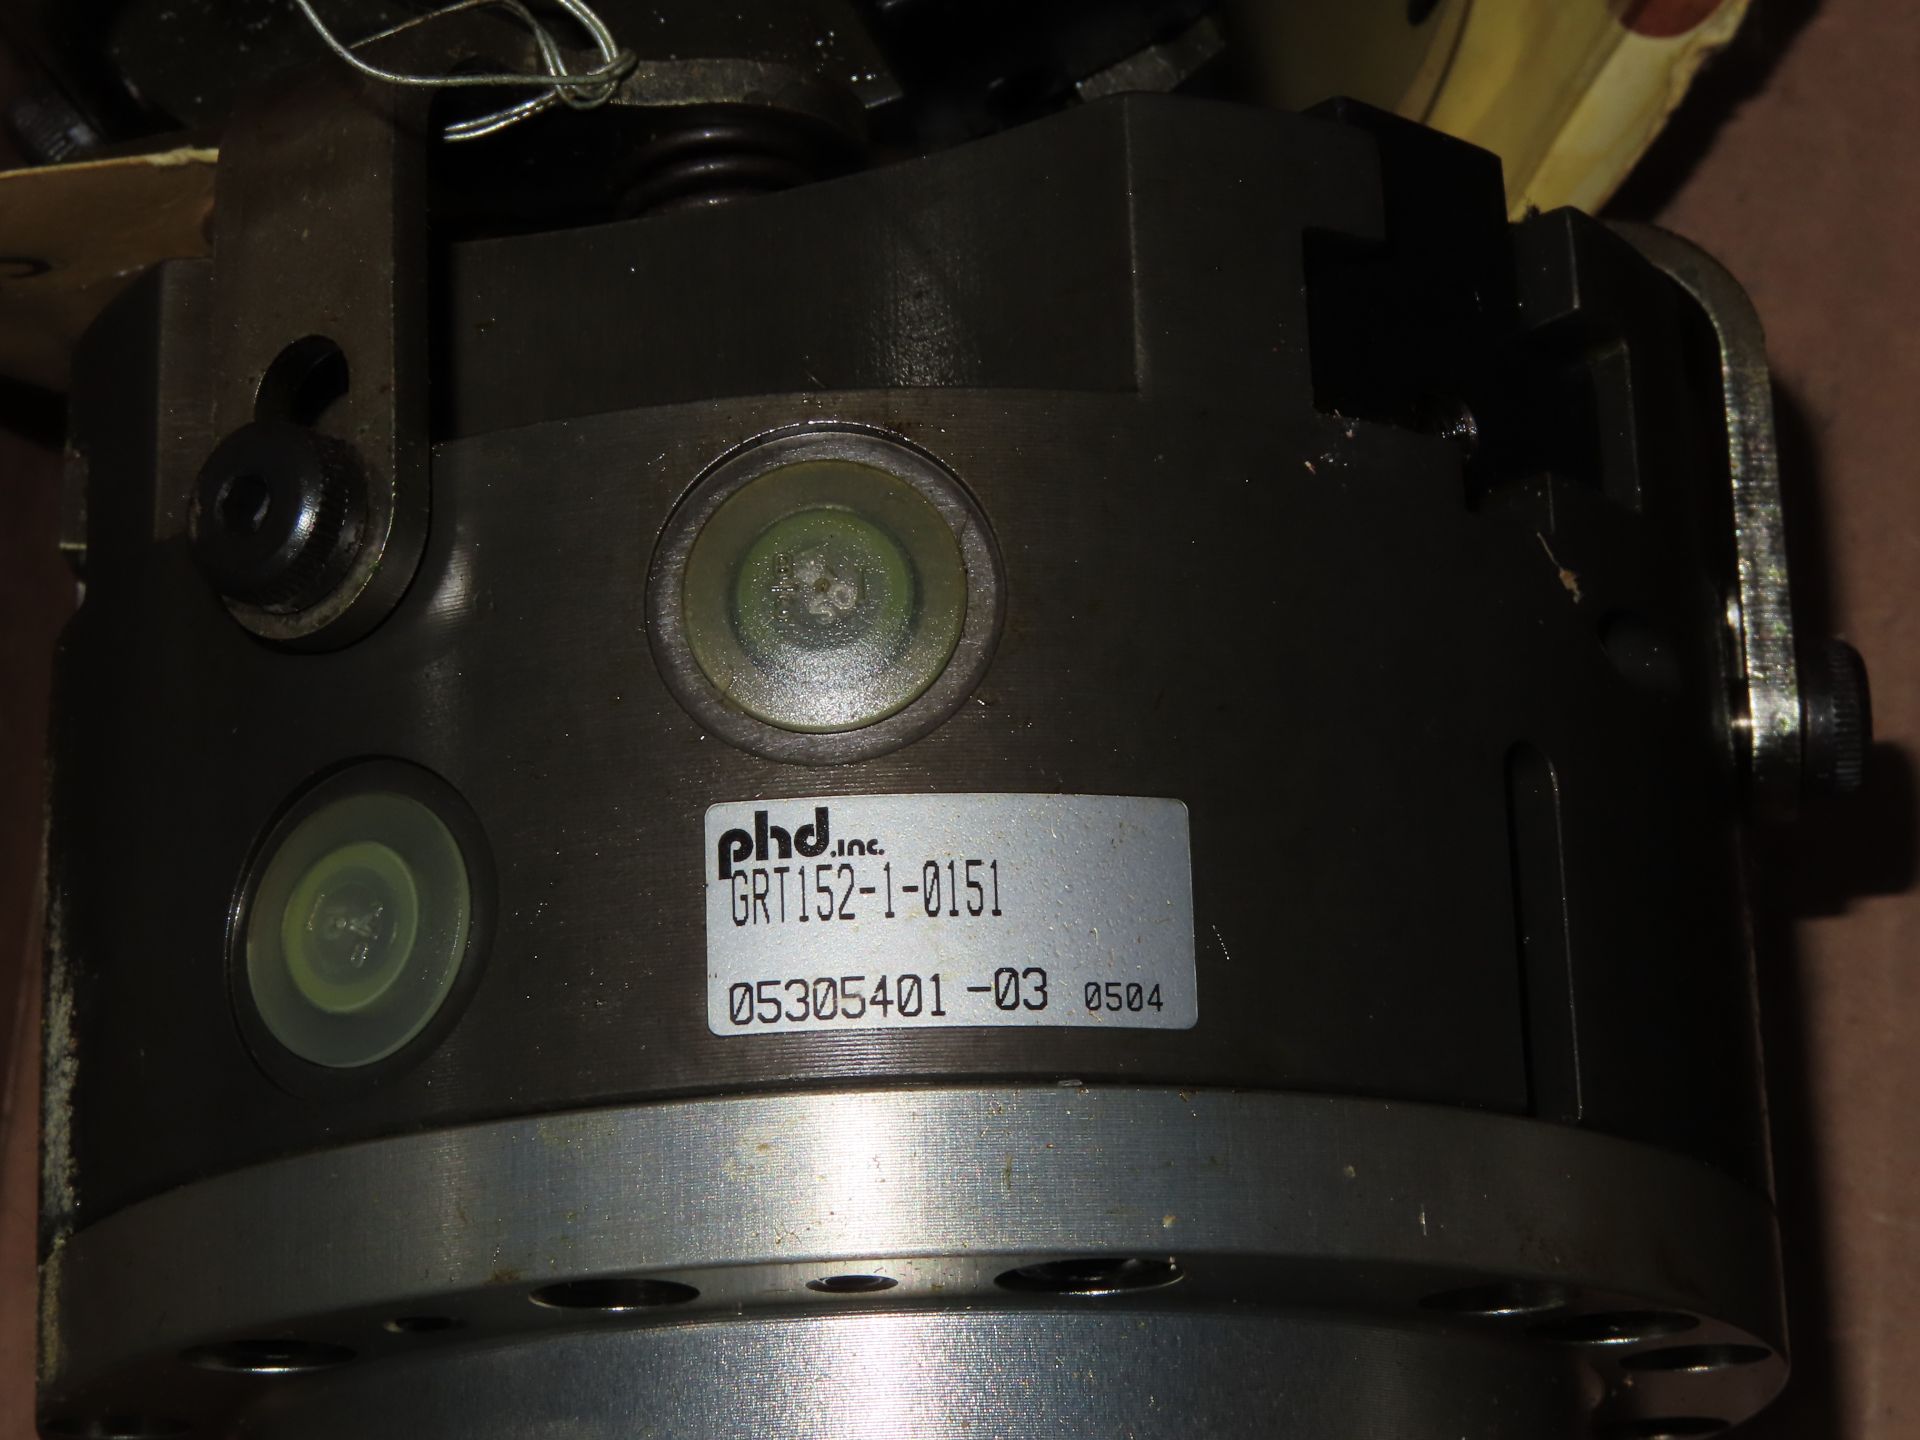 Qty 3 PHD gripper model GRT152-1-0151, used parts crib spares, as always with Brolyn LLC auctions, - Image 2 of 2